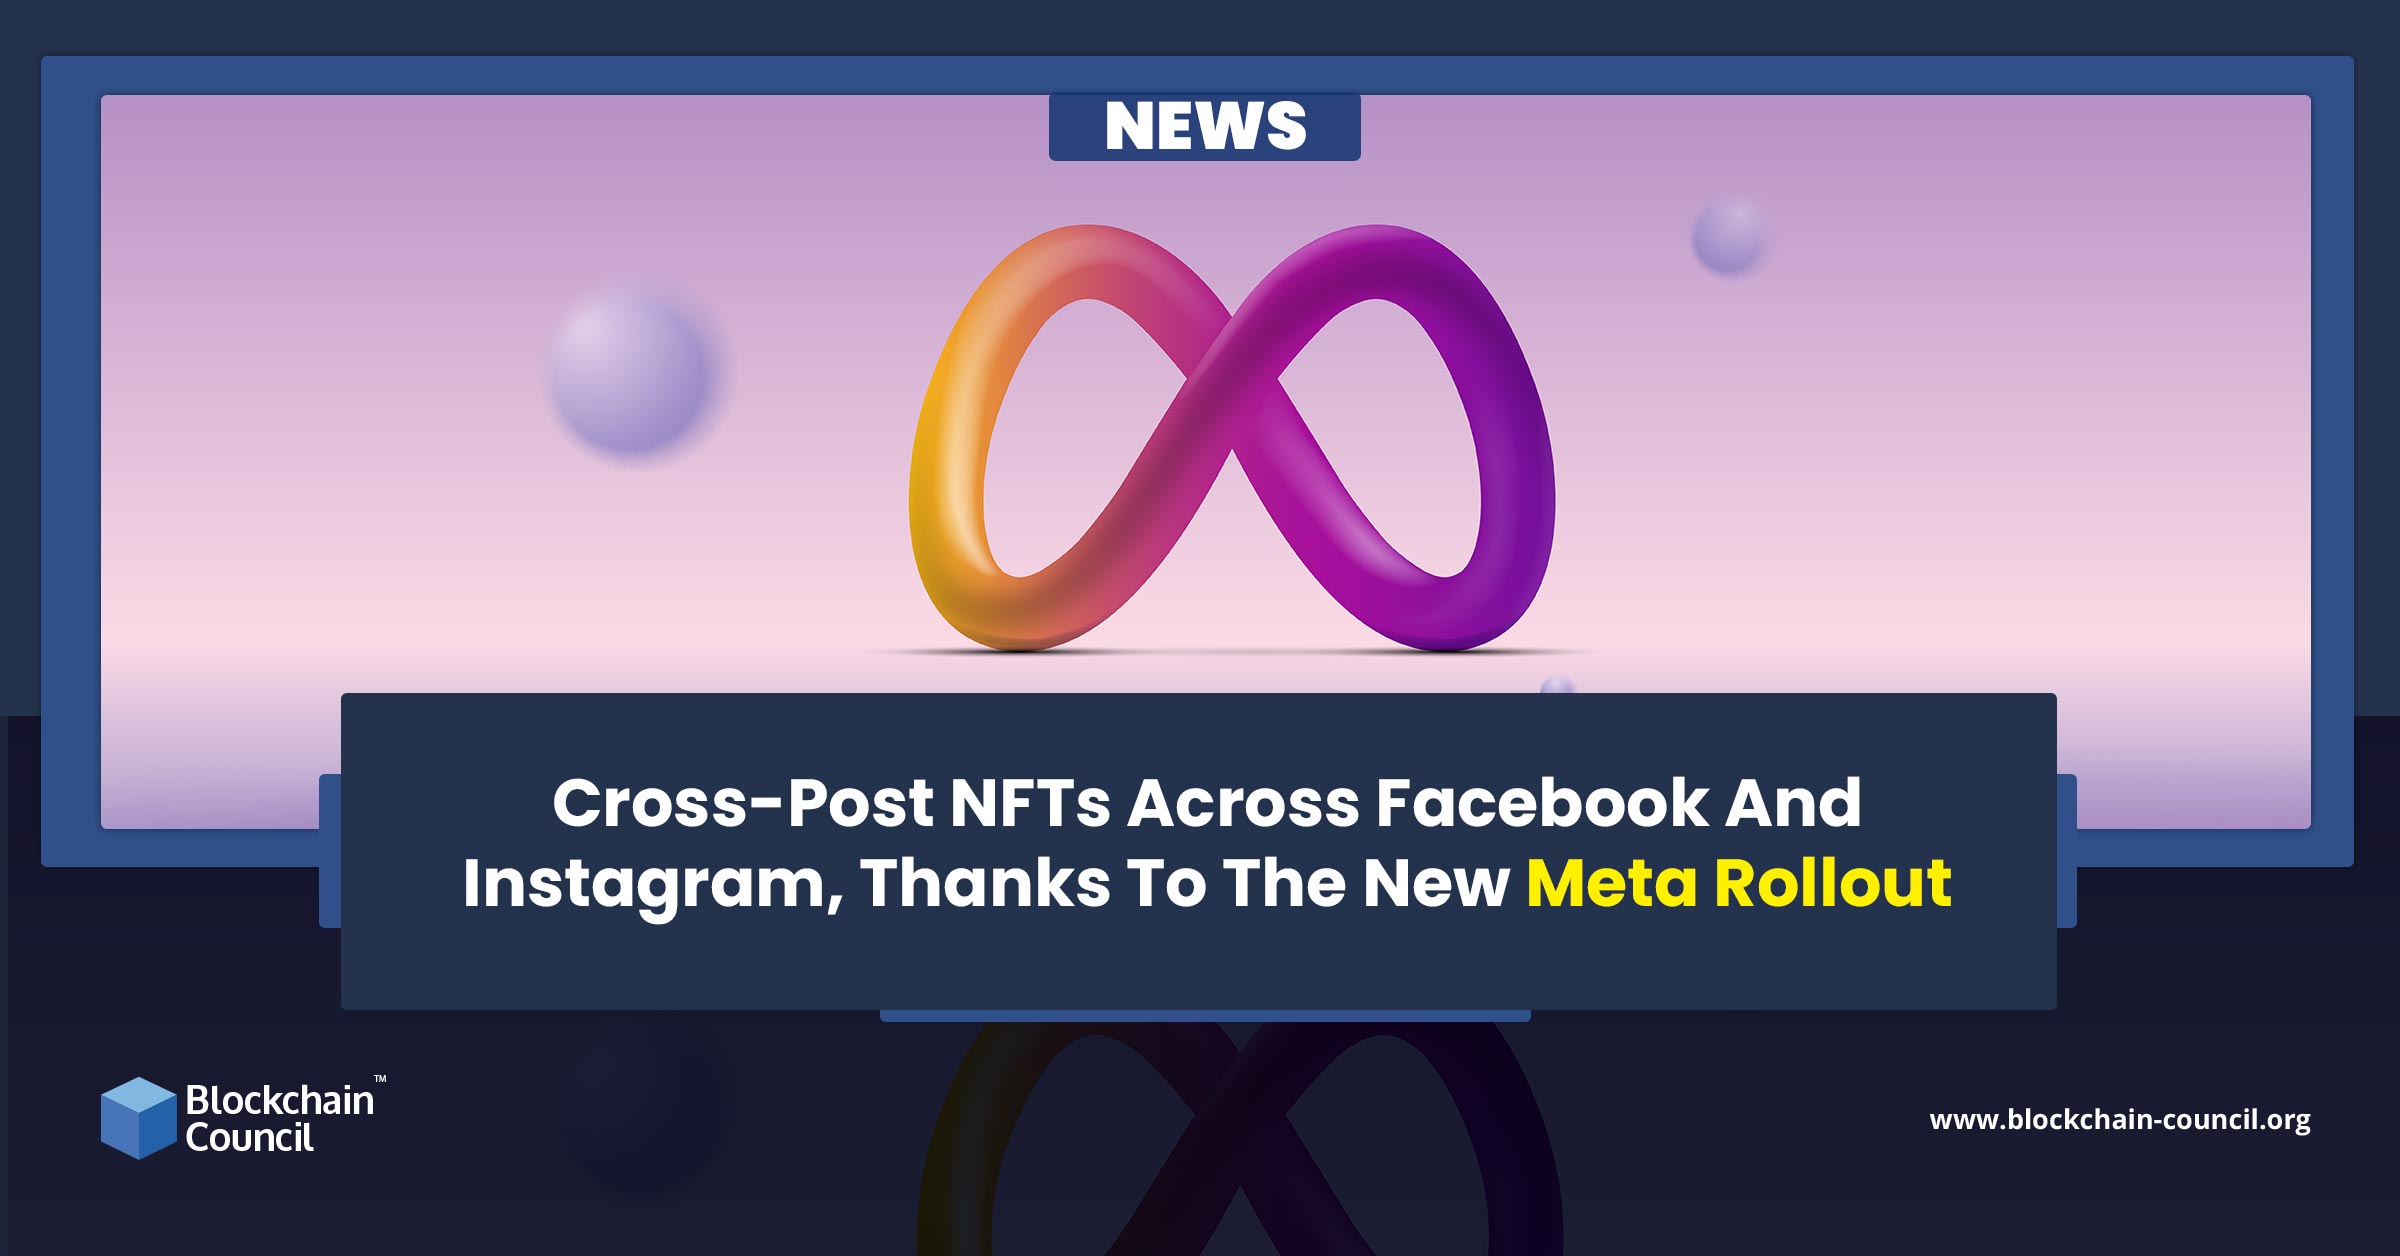 Cross-Post NFTs Across Facebook And Instagram, Thanks To The New Meta Rollout